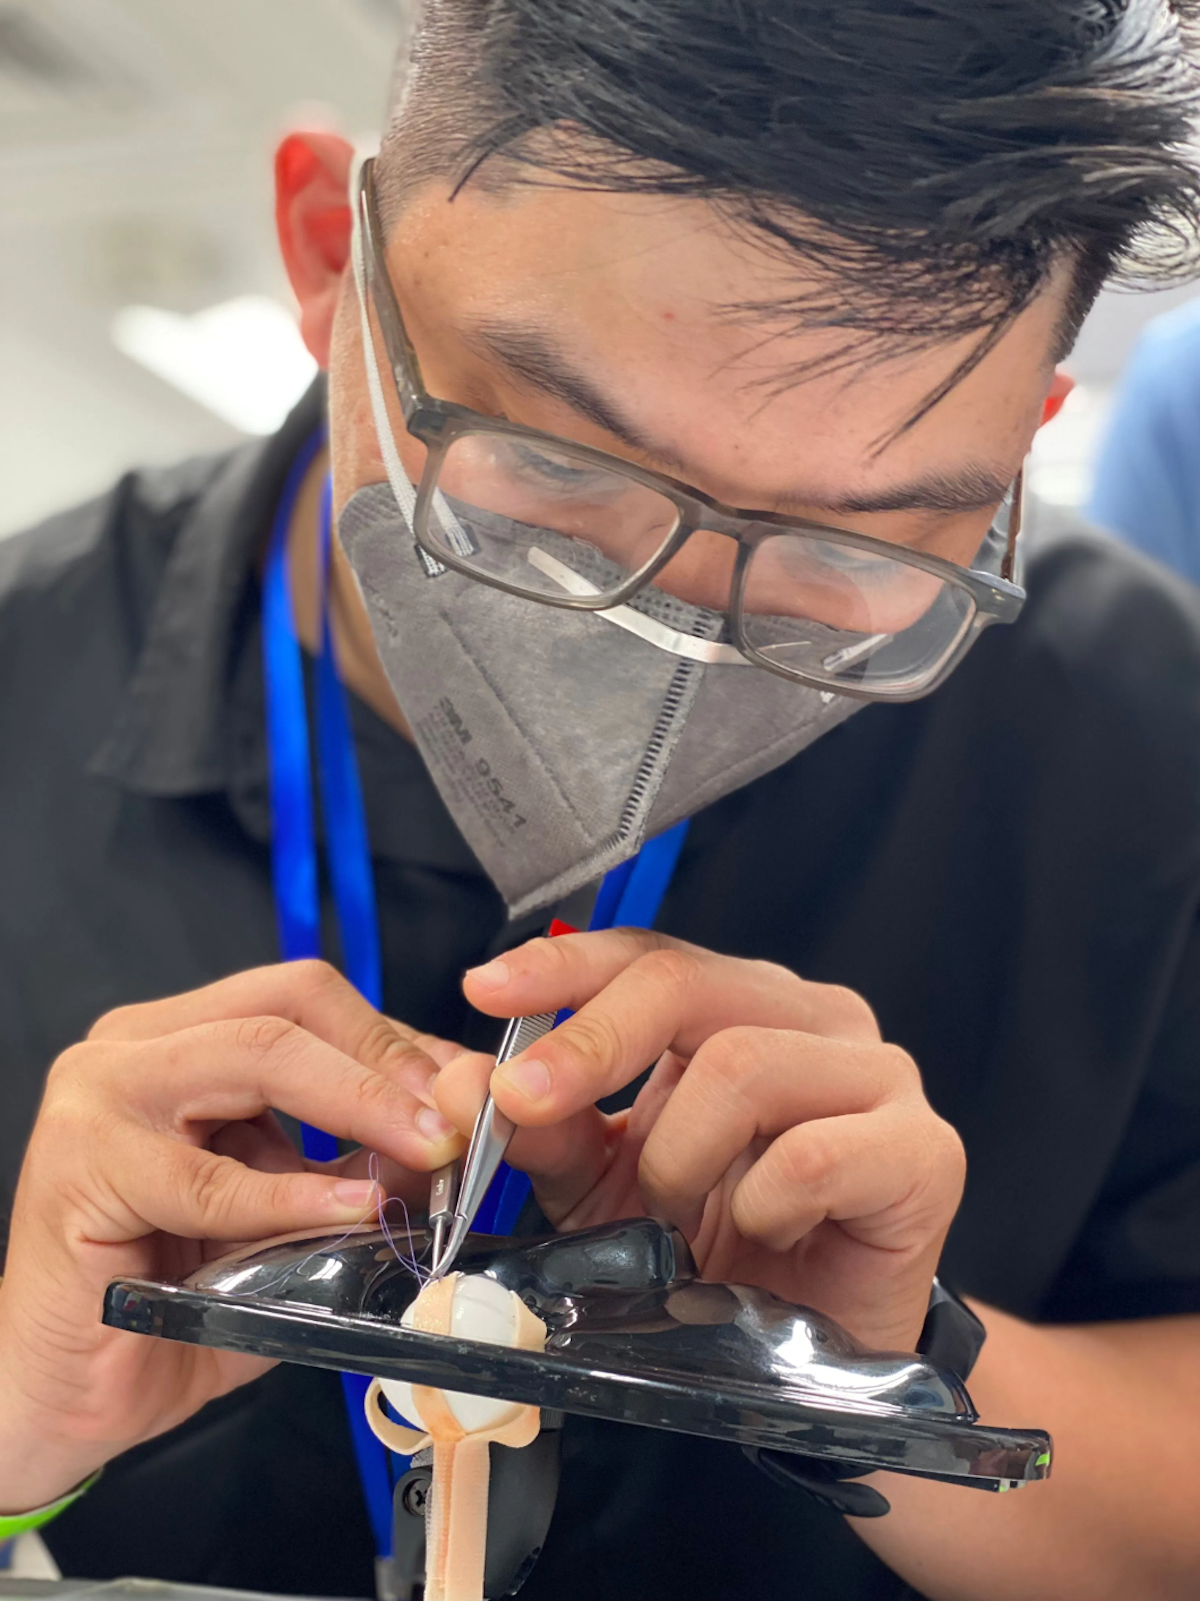 A doctor in glasses and a respiratory mask is practicing strabismus surgery skills on an artificial eye in Can Tho, Vietnam on board the Orbis Flying Eye Hospital. (Image courtesy of Orbis International)